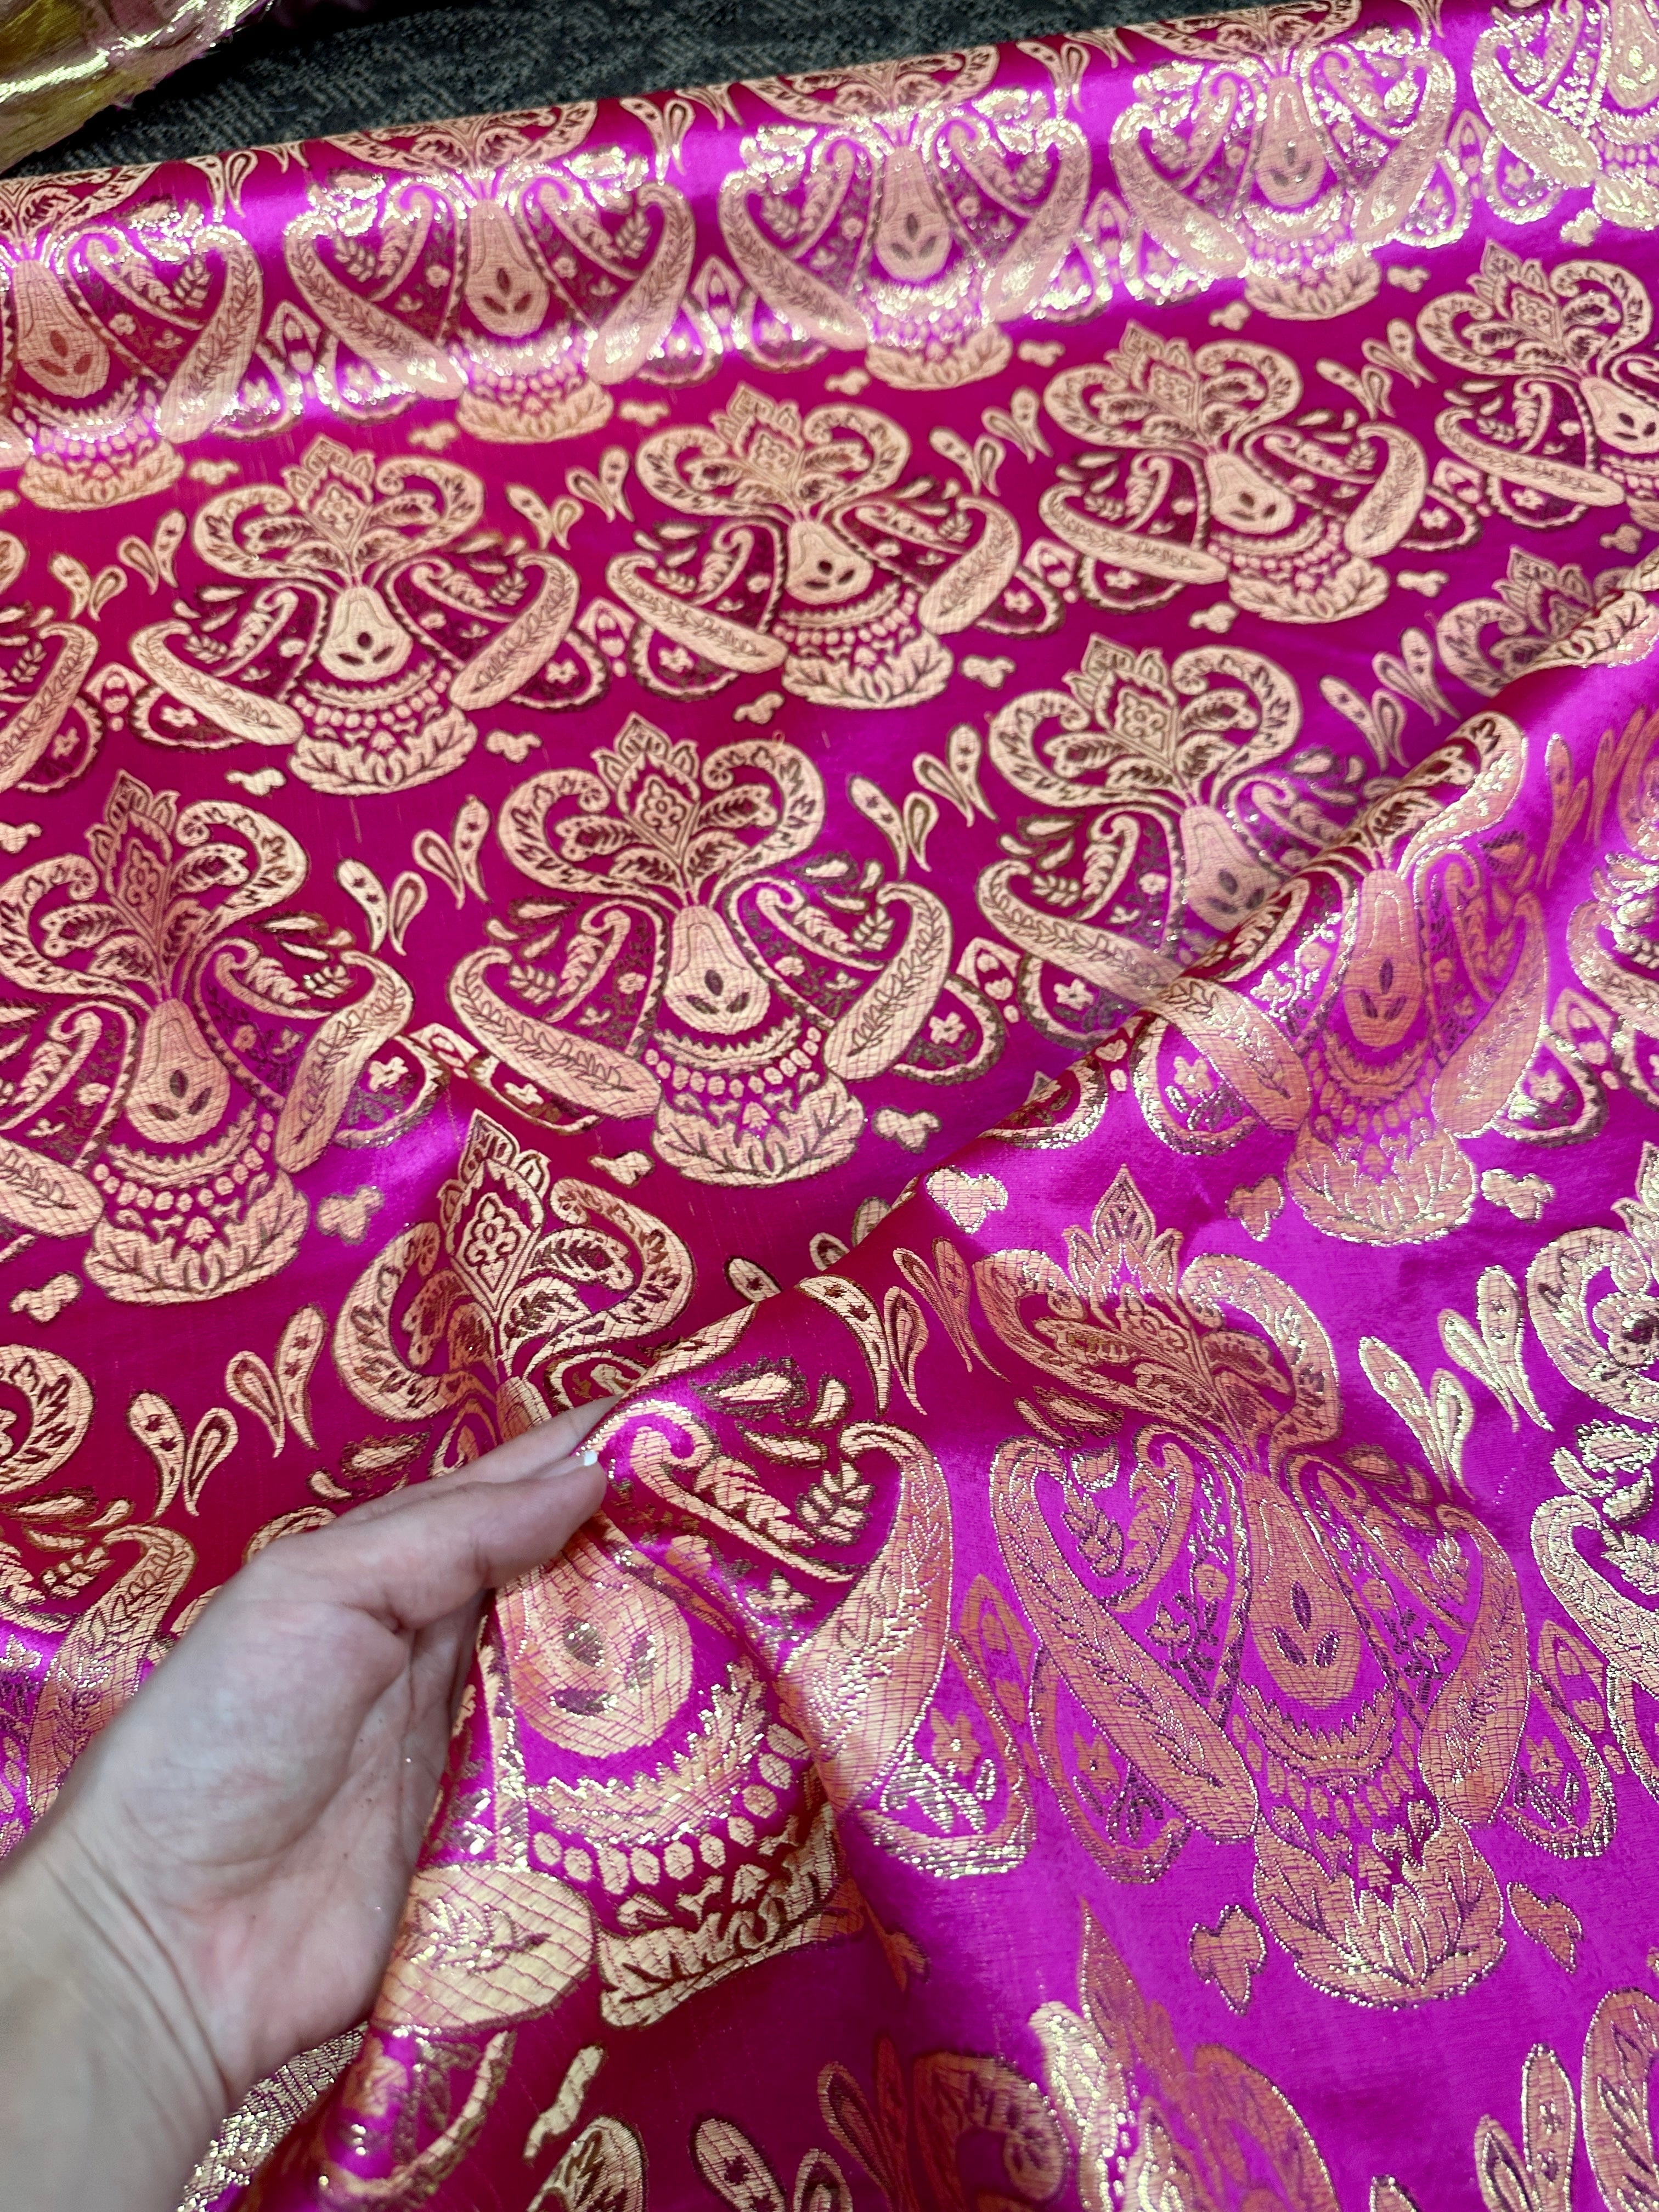 Fuchsia gold chinese Brocade, gold brocade, fuchsia brocade, pink brocade, chinese brocade for brazers, brocade for woman, brocade for bride, premium brocade, brocade in low price, best quality brocade